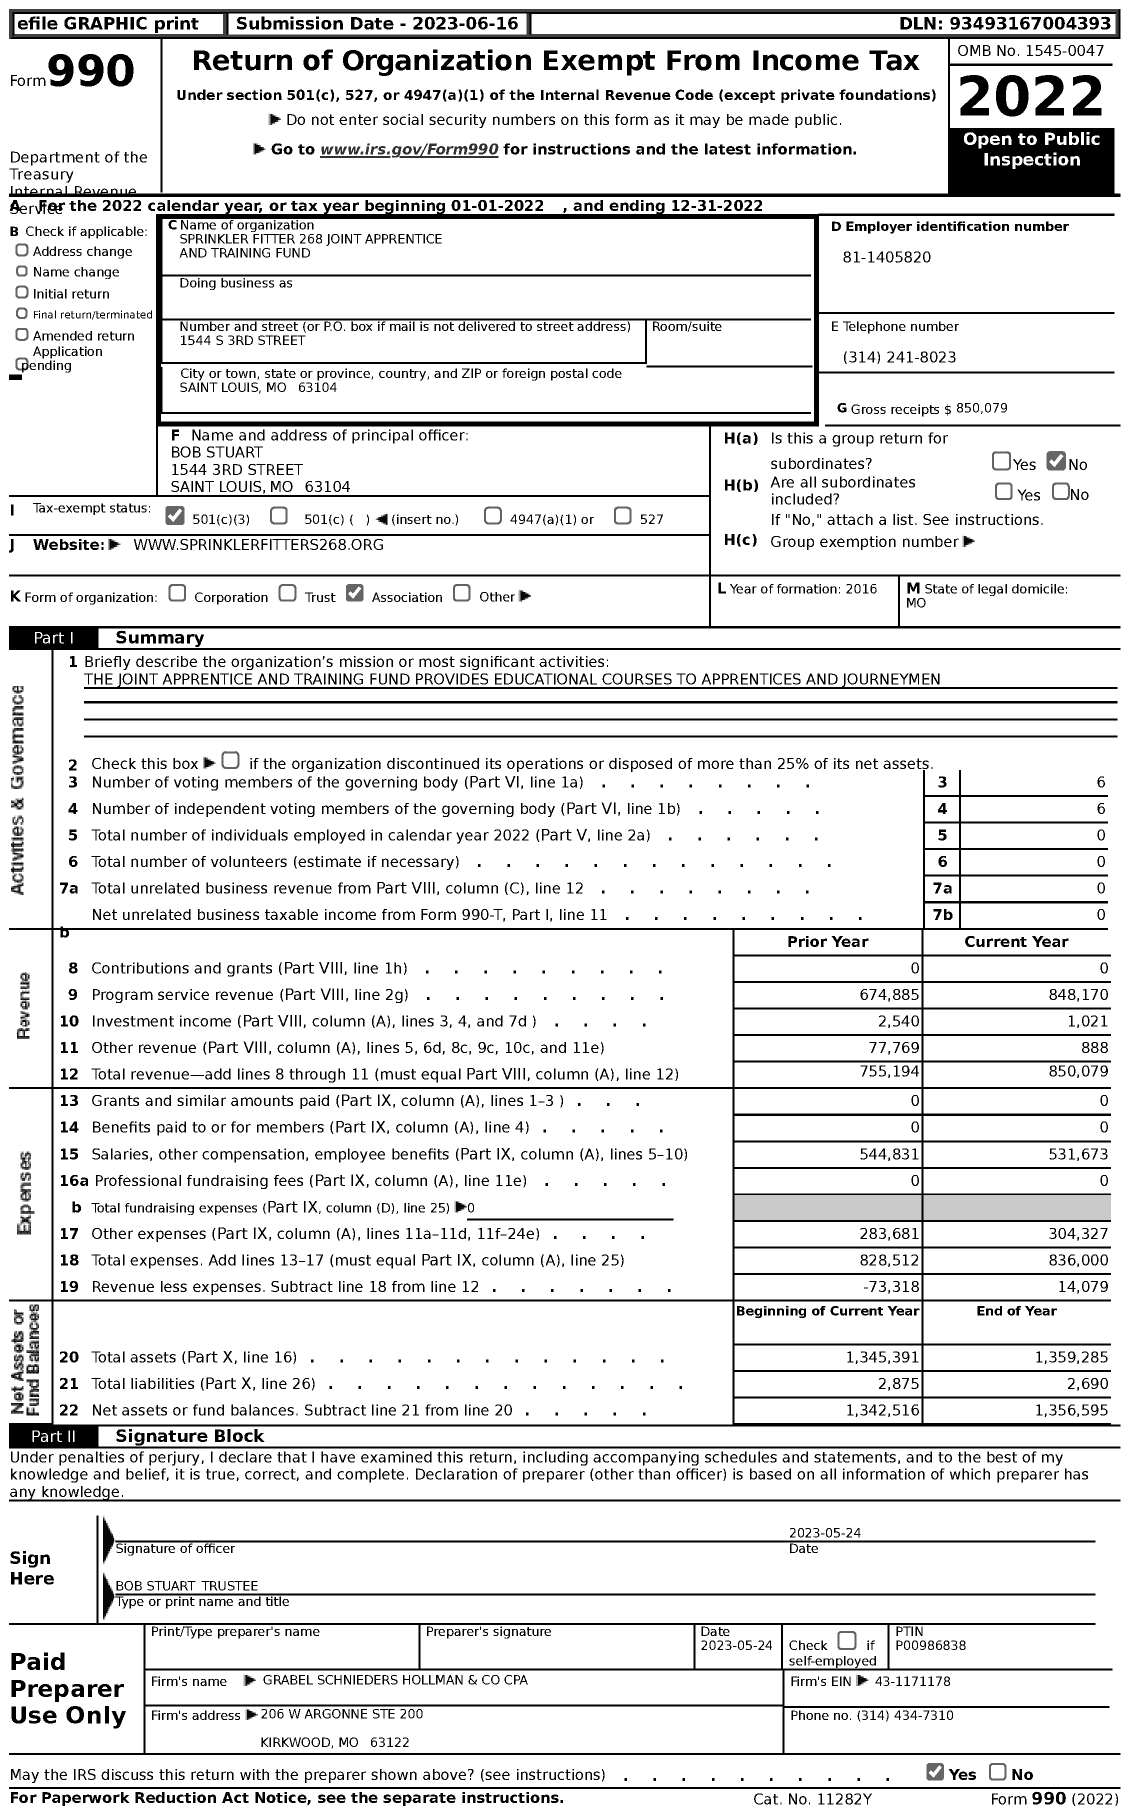 Image of first page of 2022 Form 990 for Sprinkler Fitter 268 Joint Apprentice and Training Fund